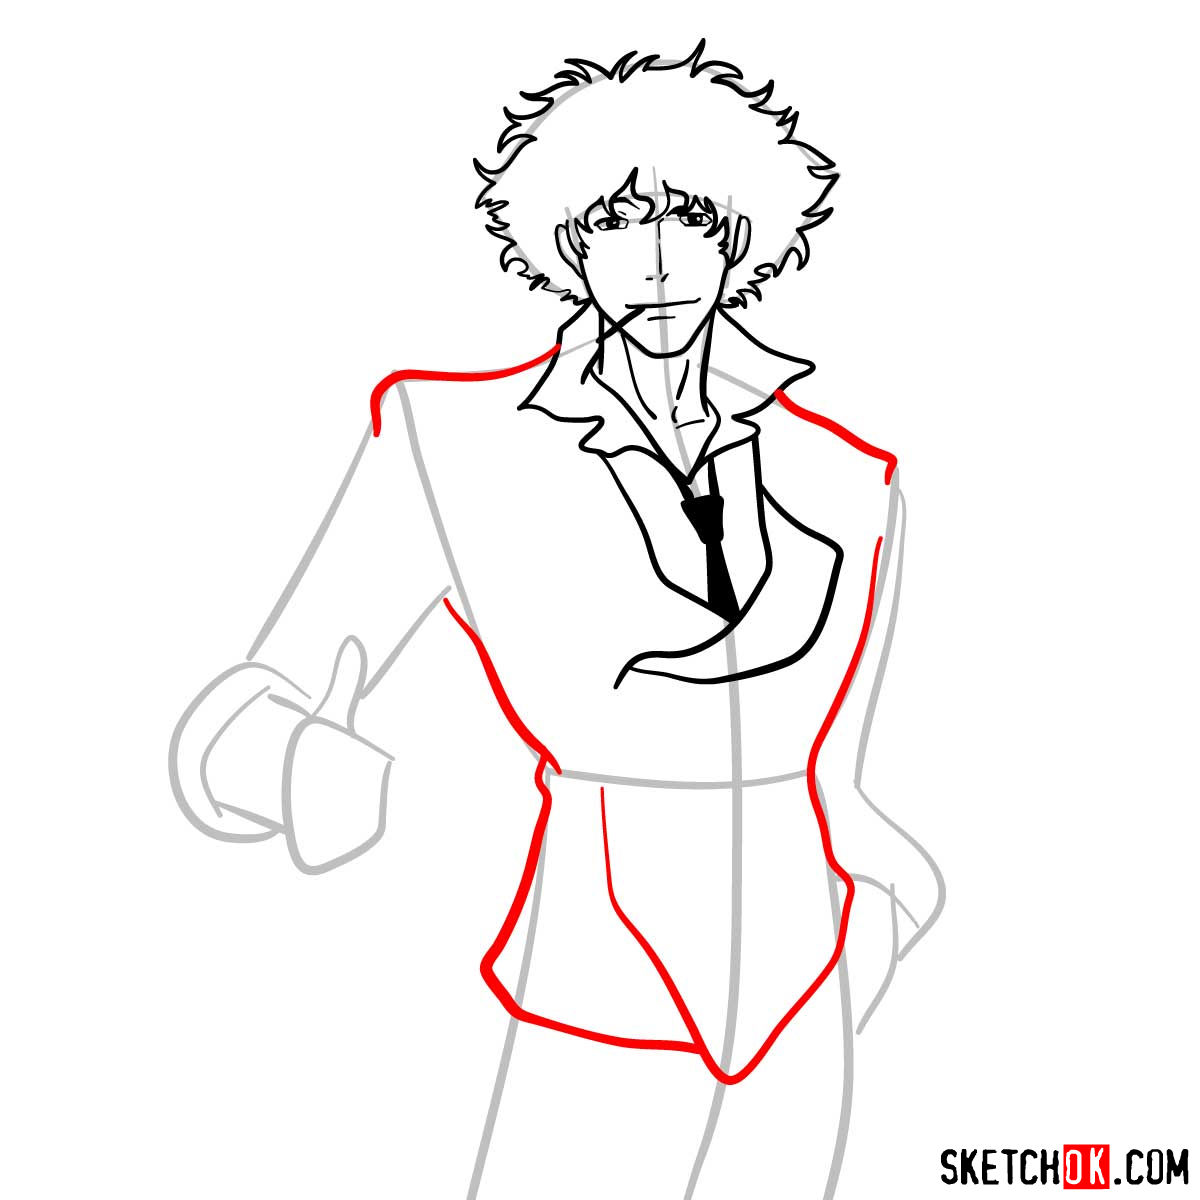 How to draw Spike Spiegel from Cowboy Bebop anime - step 08